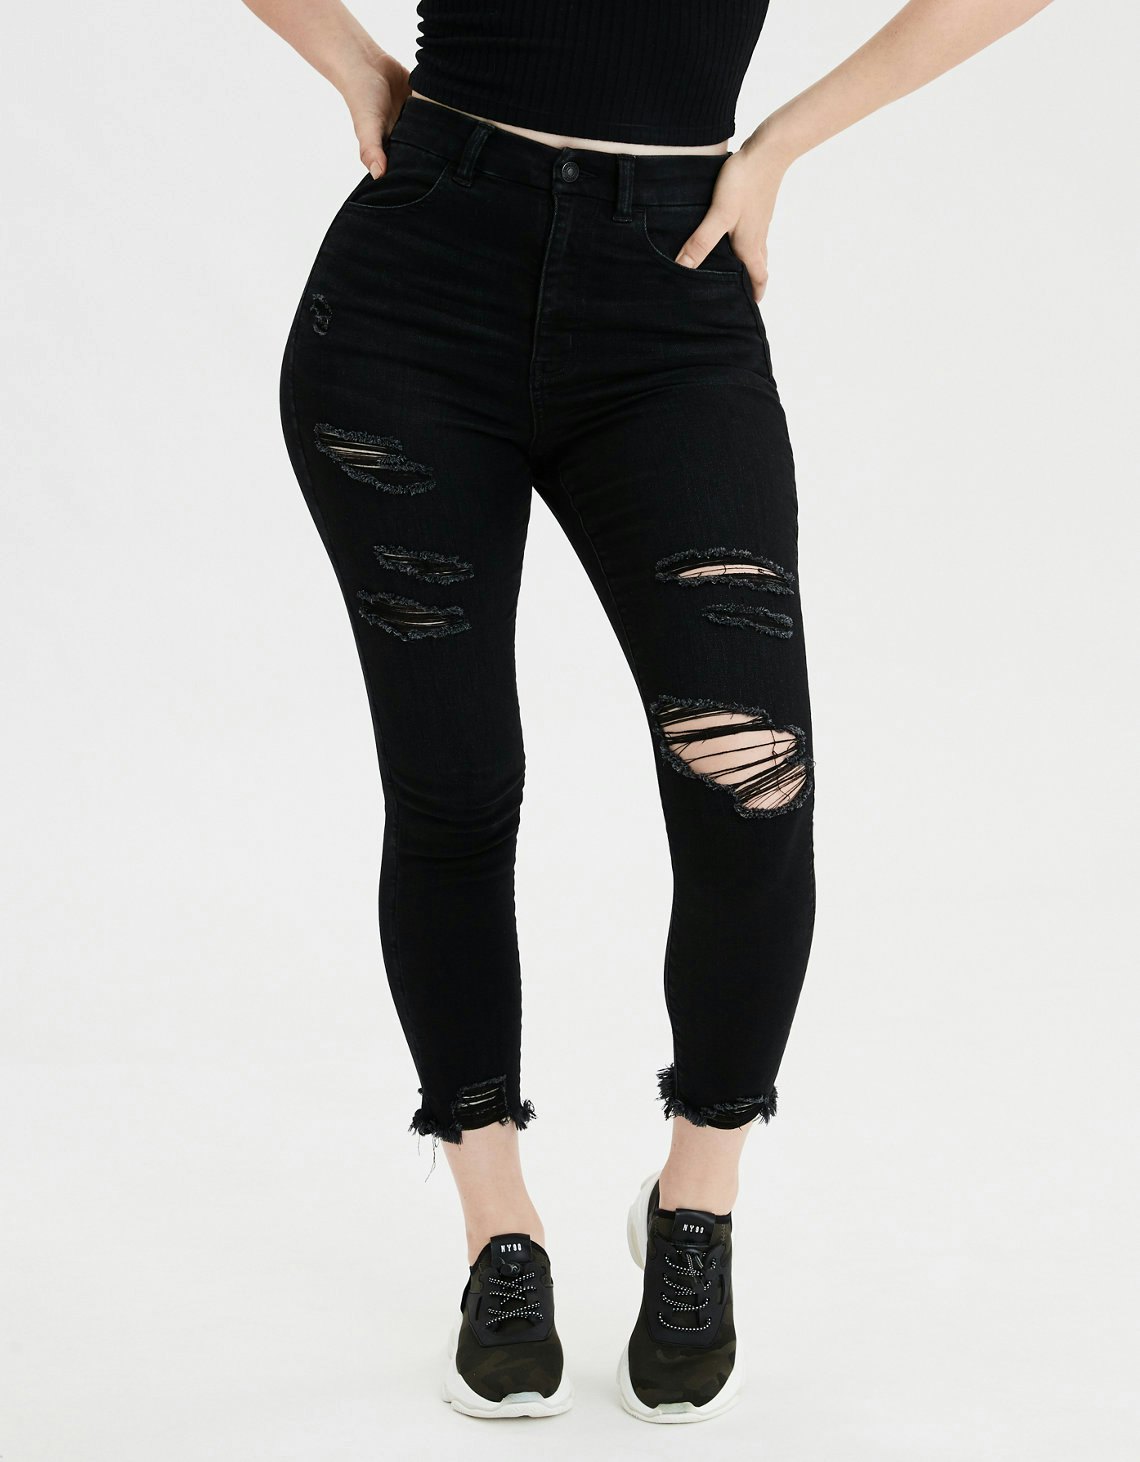 ae next level high waisted jegging crop